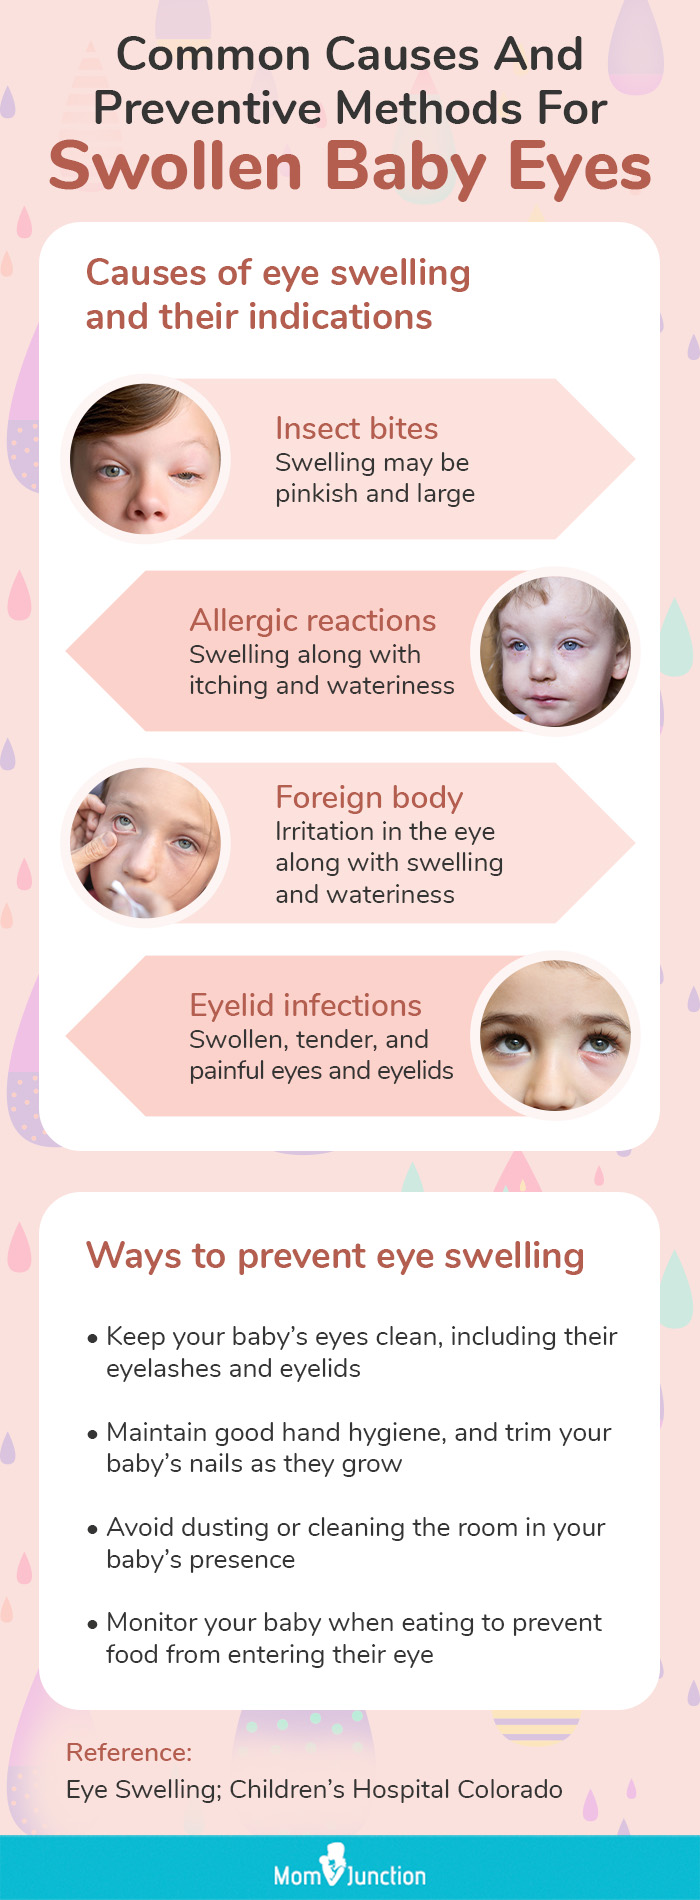 Toddler Has Bags Under Eyes - What to Do For Puffy Under Eyes Baby -  getkoreaneyes.com